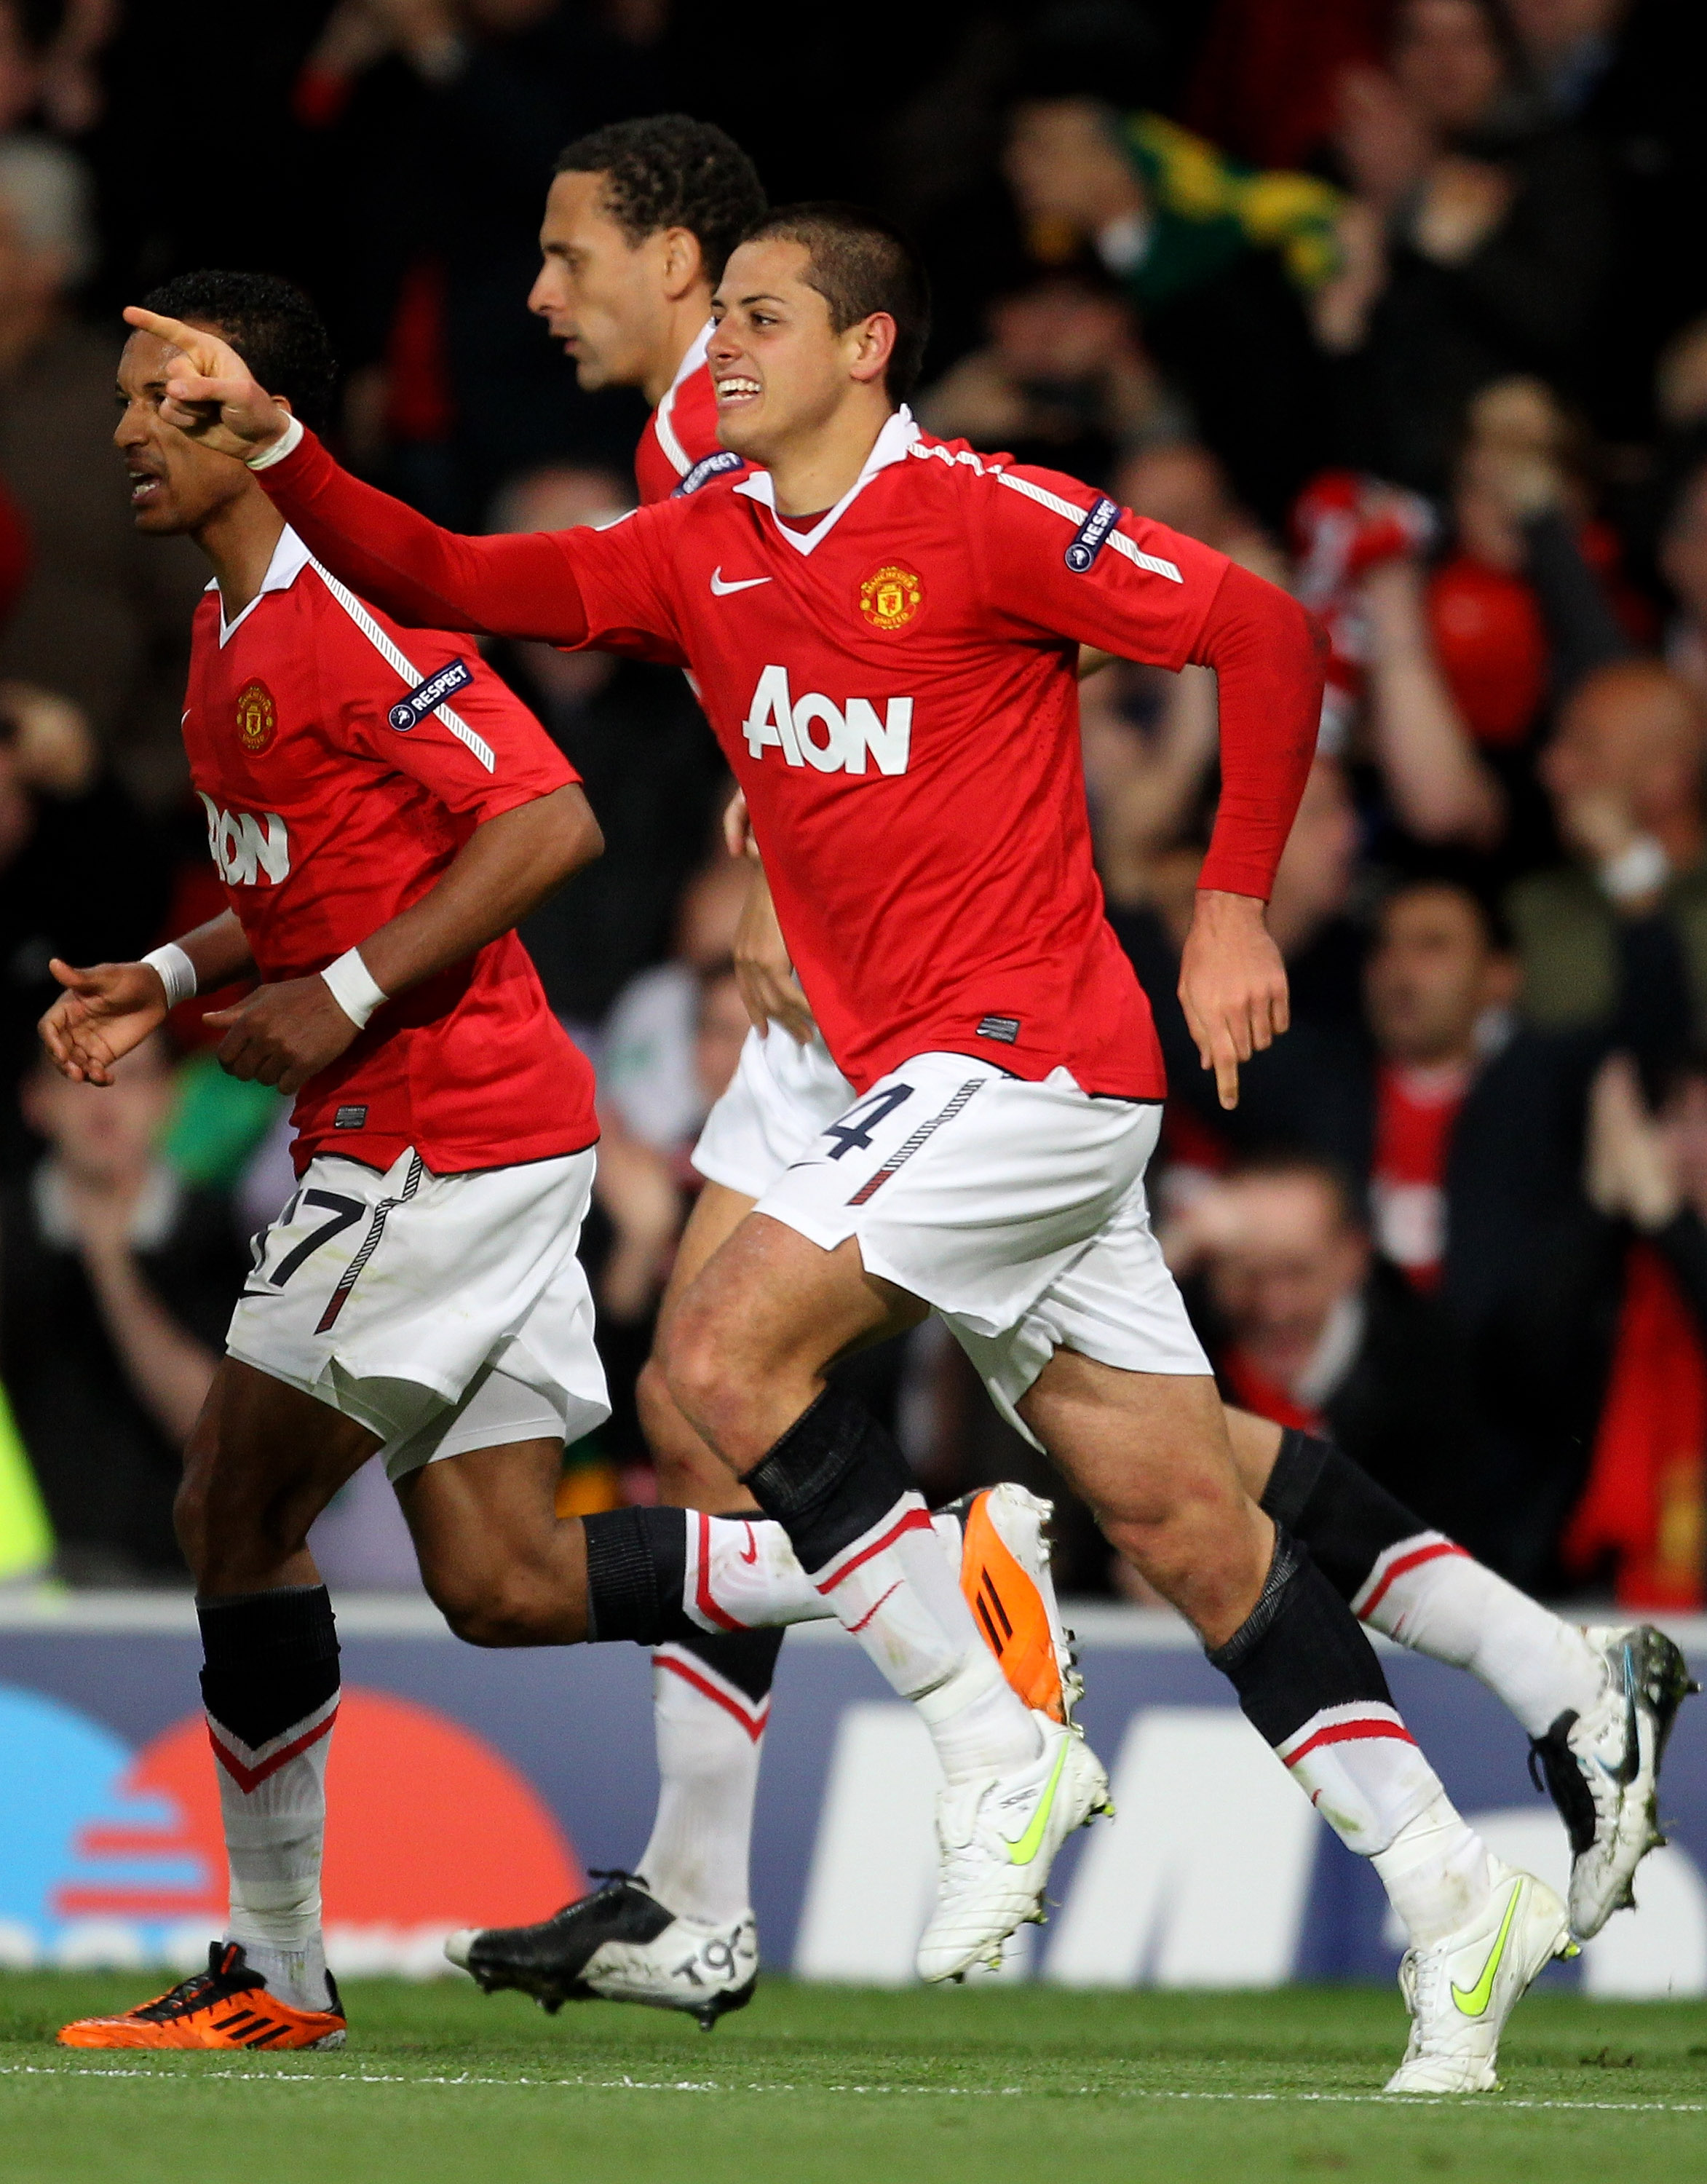 MANCHESTER, ENGLAND - APRIL 12:  Javier Hernandez of Manchester United celebrates scoring the opening goal during the UEFA Champions League Quarter Final second leg match between Manchester United and Chelsea at Old Trafford on April 12, 2011 in Mancheste